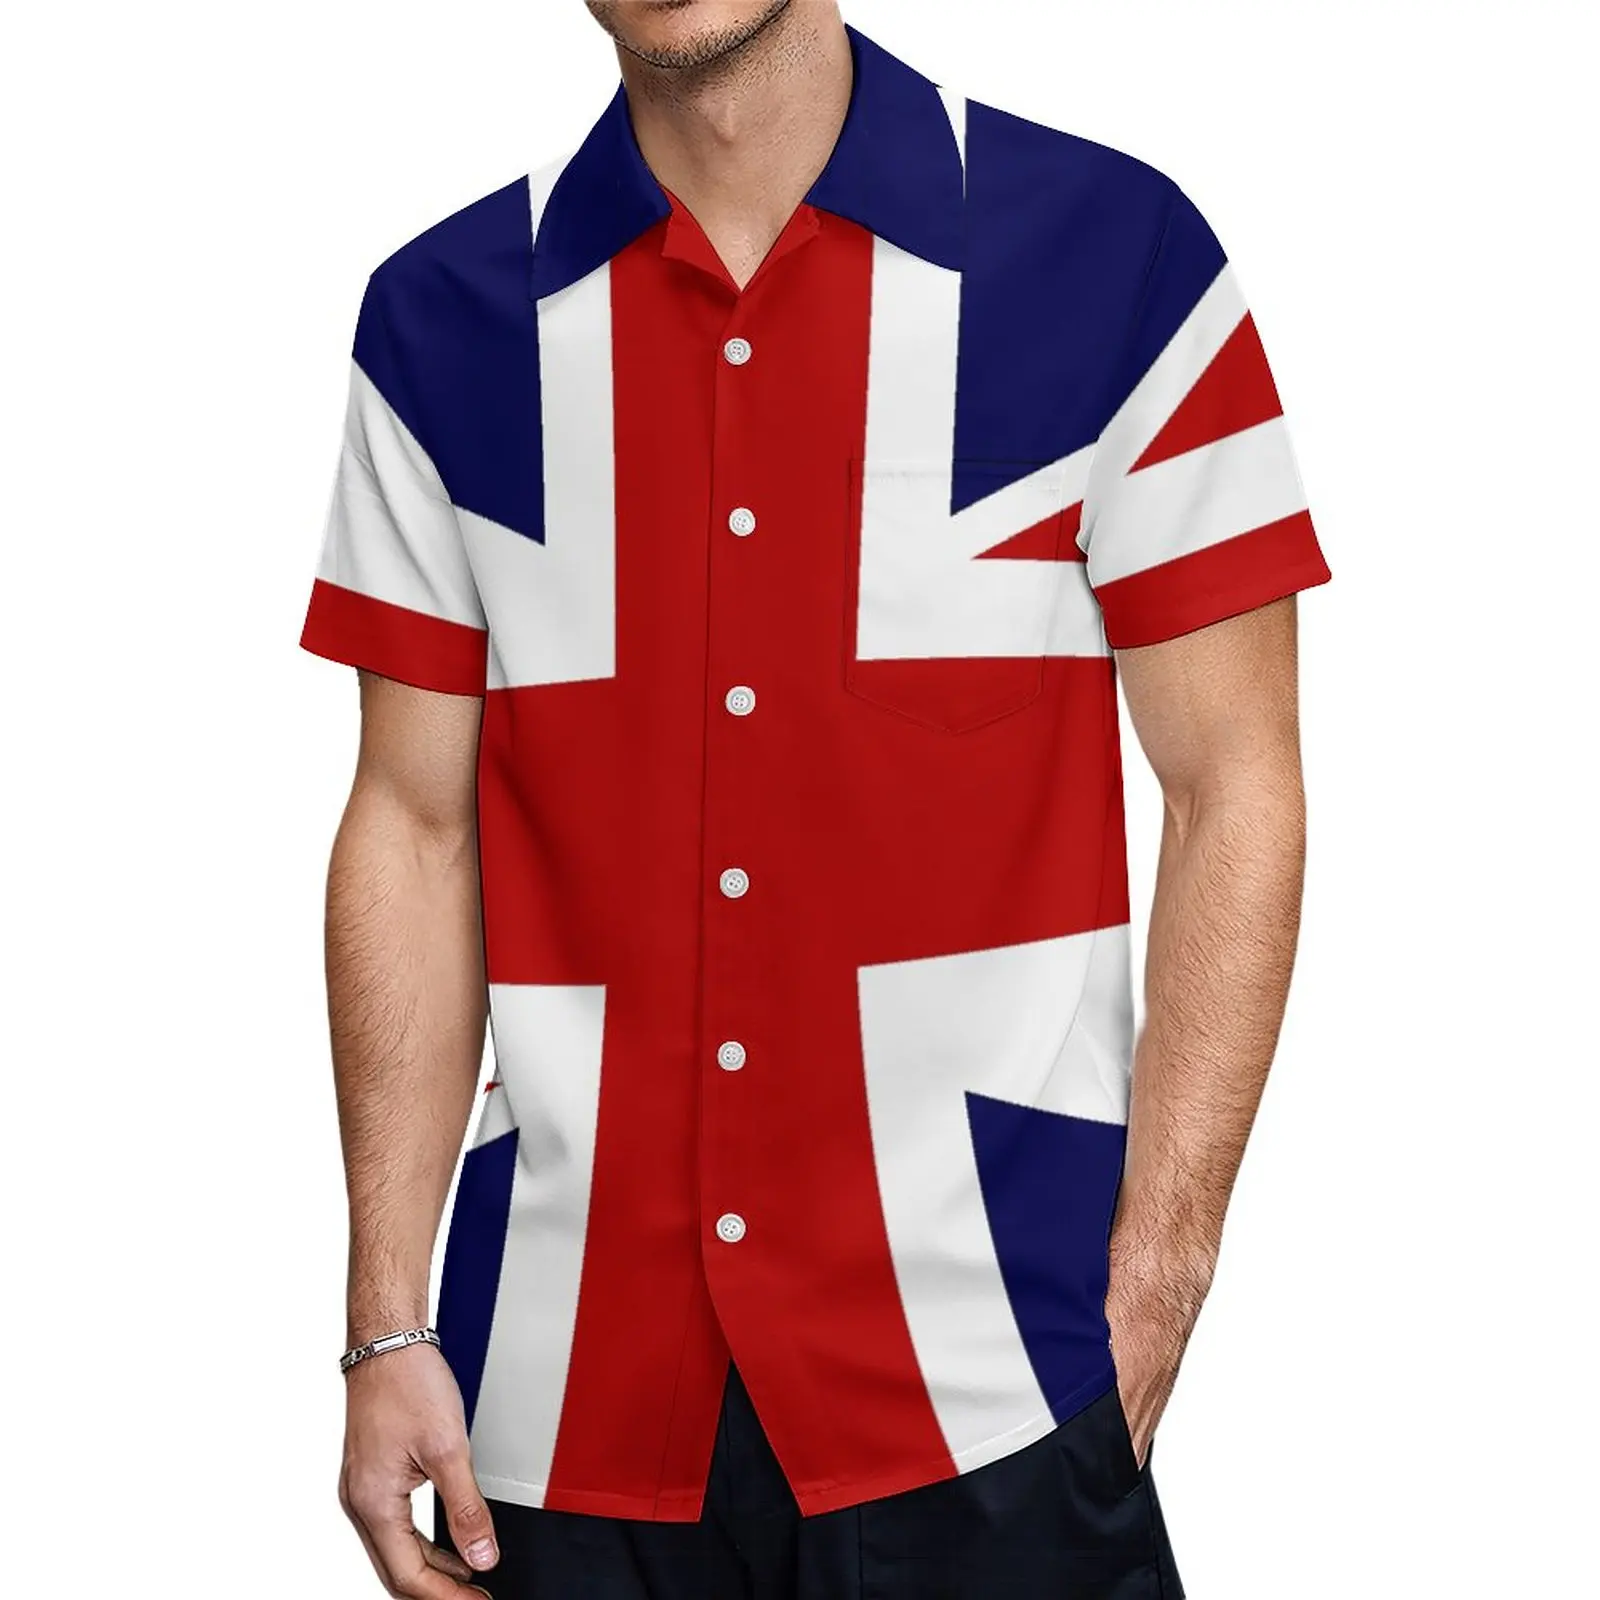 

Union Jack Flag of The UK A Short Sleeved Shirt Novelty T-shirts Coordinates Top Quality Swimming USA Size